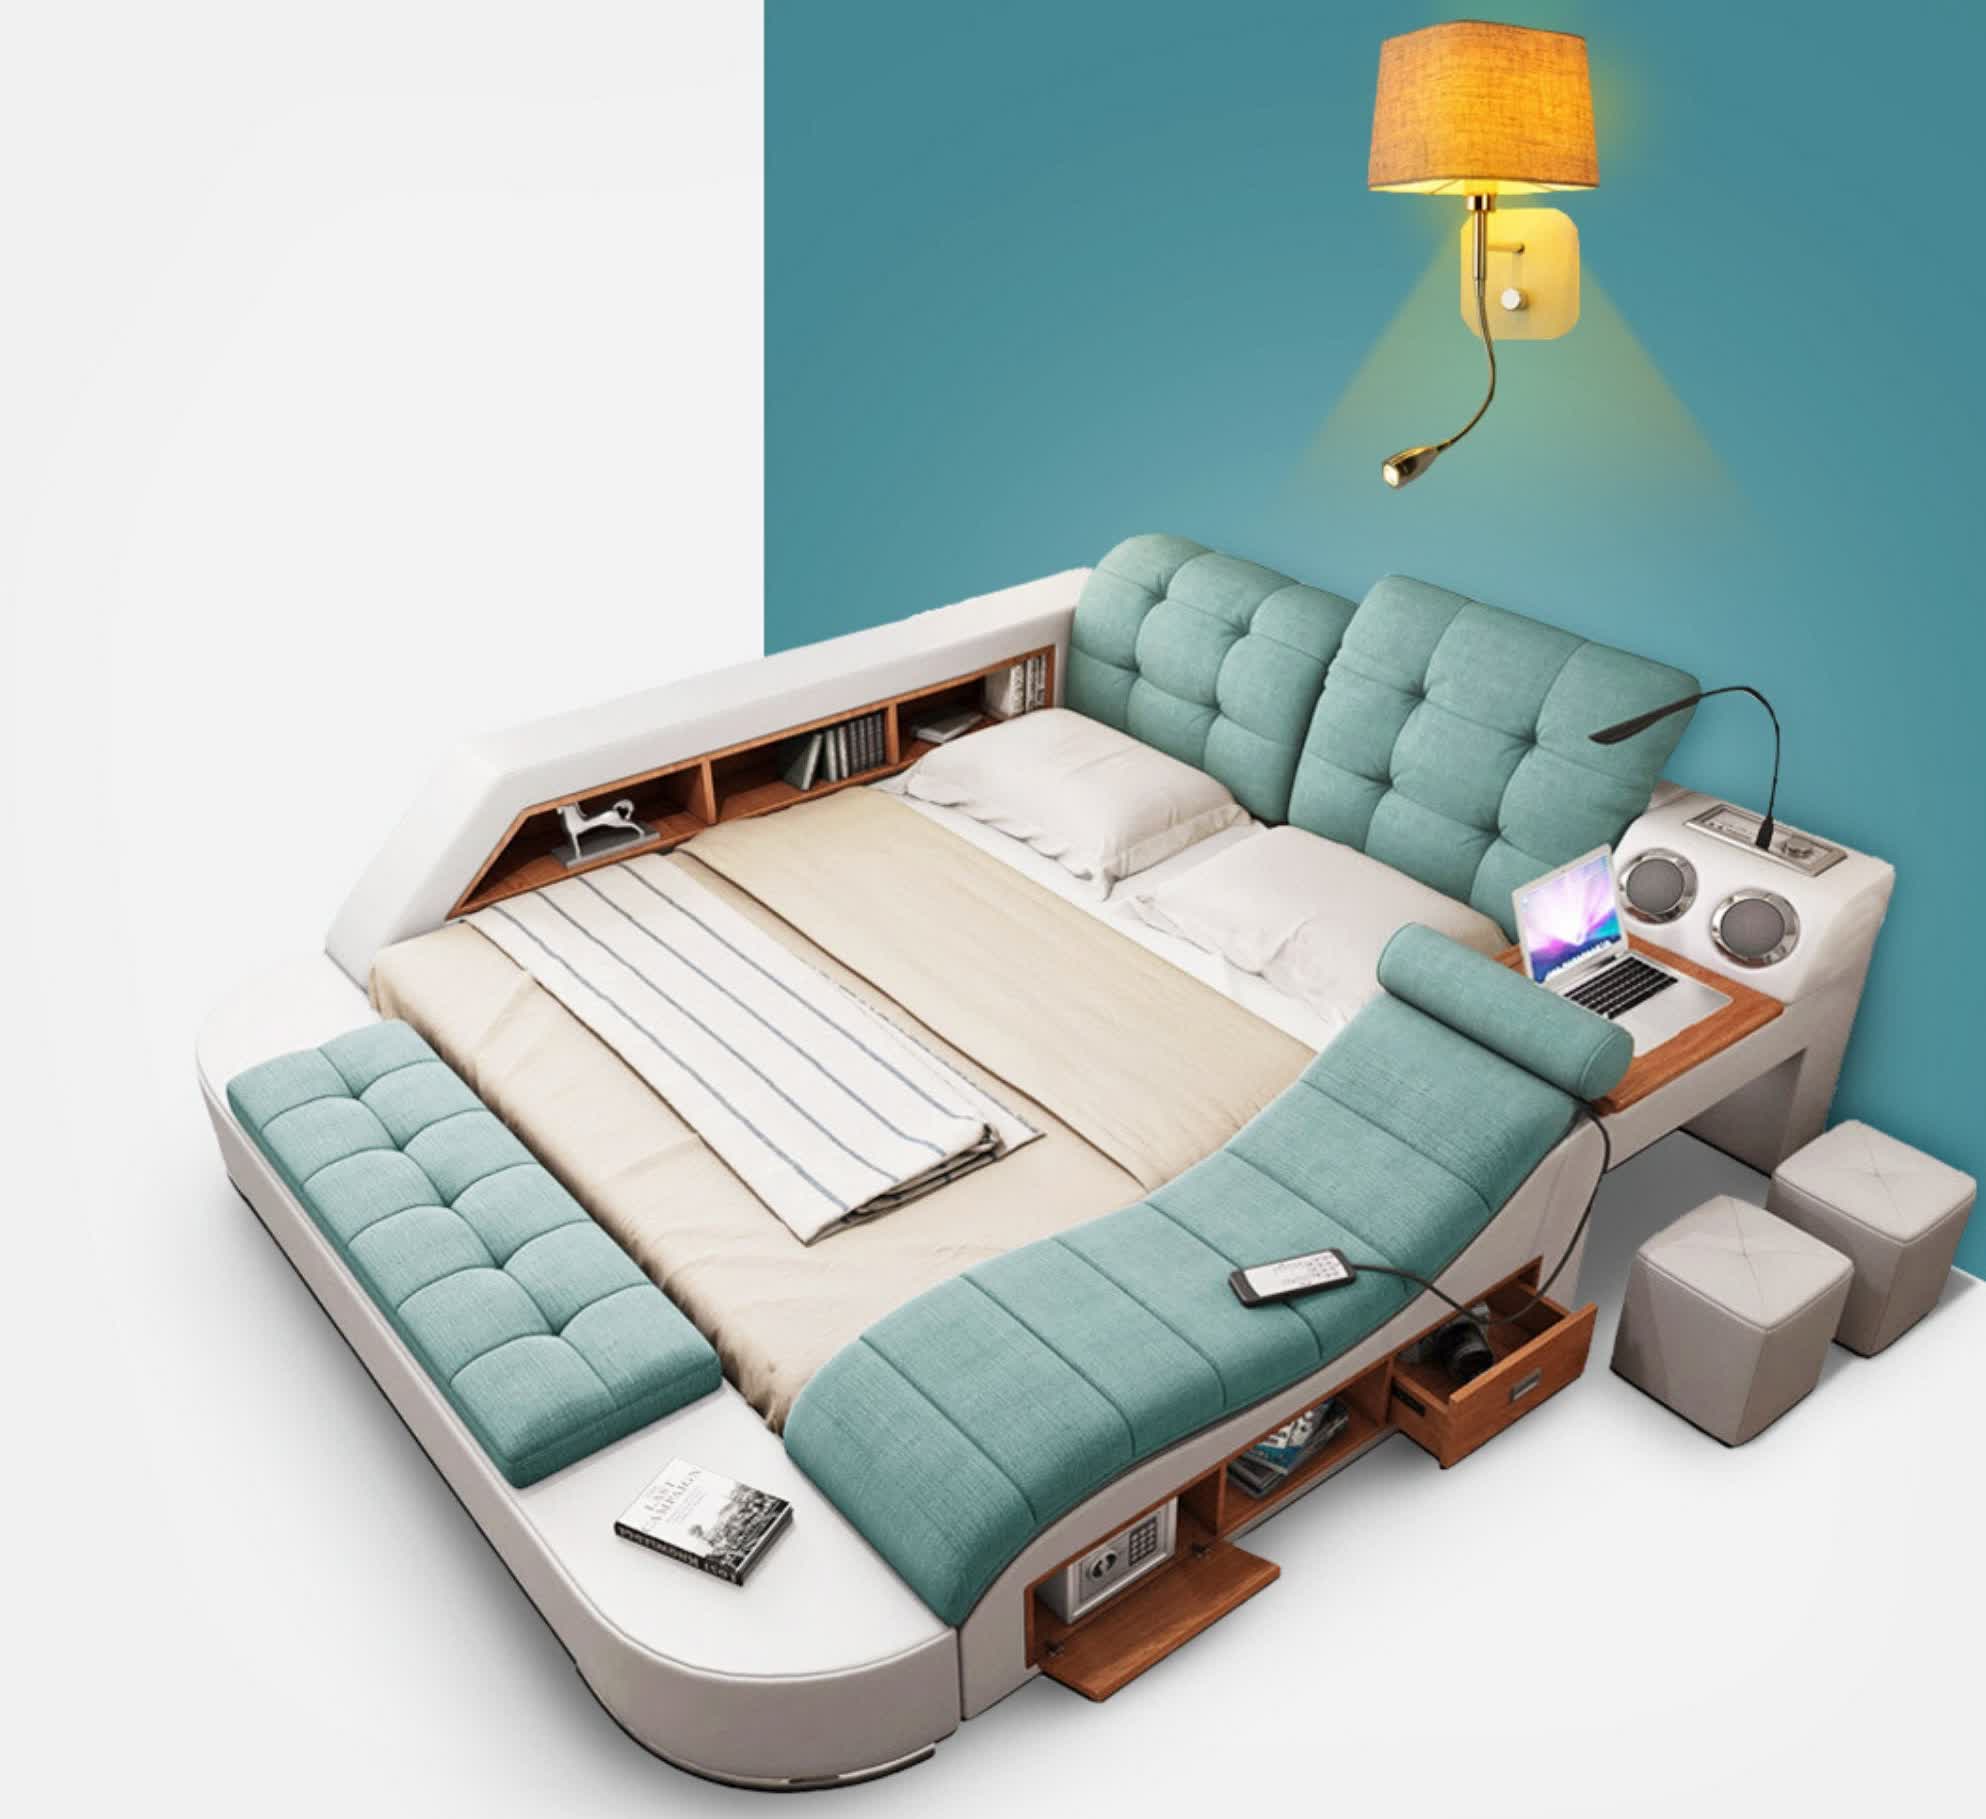 Get comfortable working from home with the Tech Bed